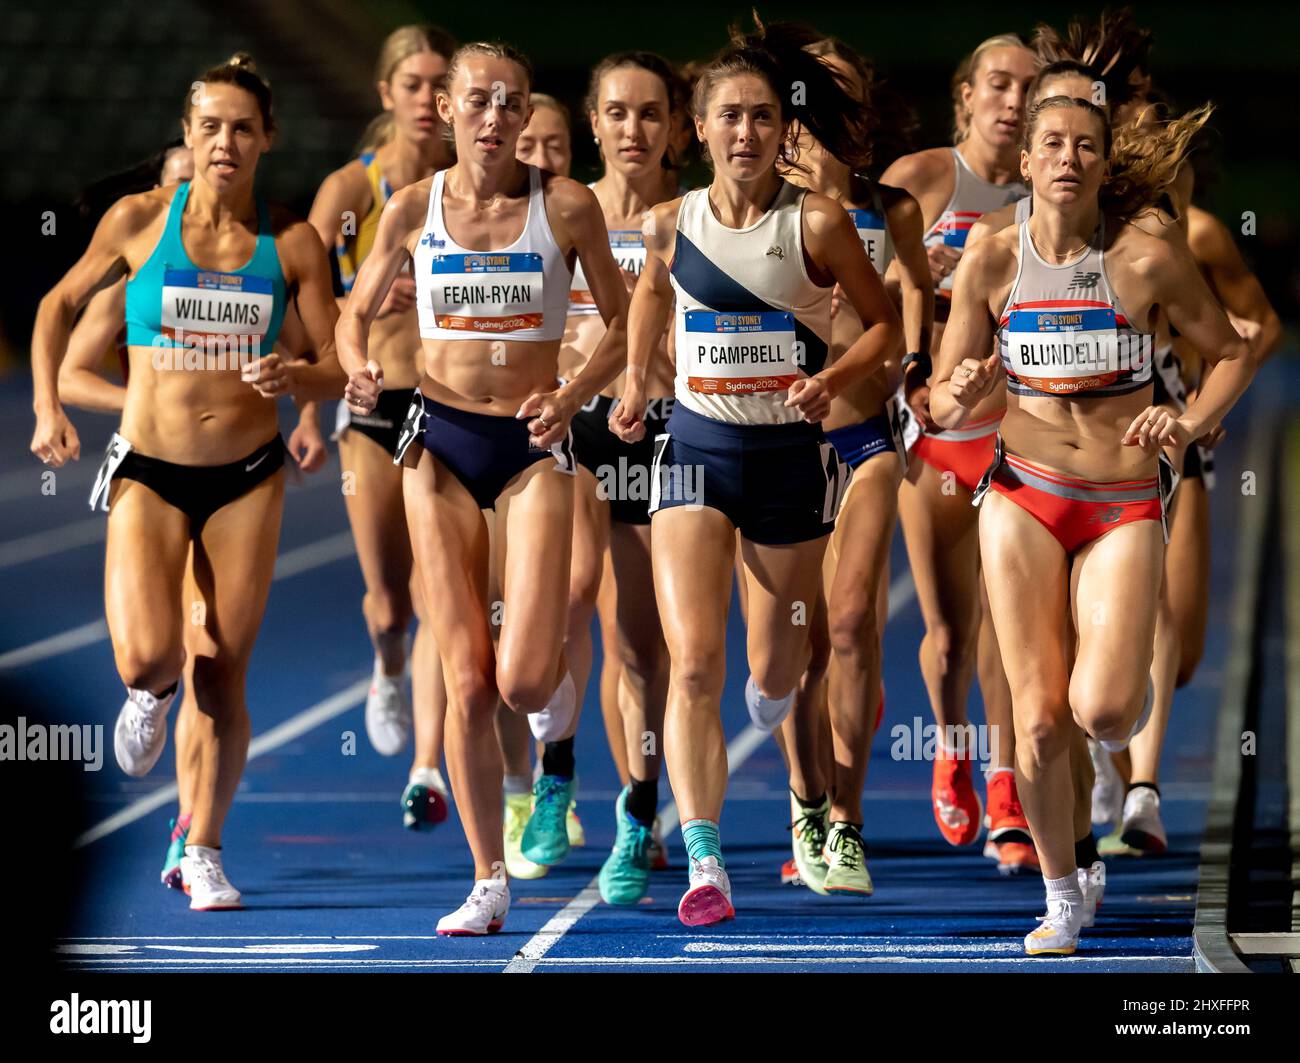 Sydney, Australia. 12th Mar, 2022. Brooke Williams, Cara Feain Ryan, Paige Campbell, Jenny Blundell ( Left- Right ) competes in the Women 3000 Metre Nat Final Open during 2022 Chemist Warehouse Sydney Track Classic at Sydney Olympic Park Athletics Centre on March 12, 2022 in Sydney, Australia. ( Editorial use only) Credit: Izhar Ahmed Khan/Alamy Live News/Alamy Live News Stock Photo